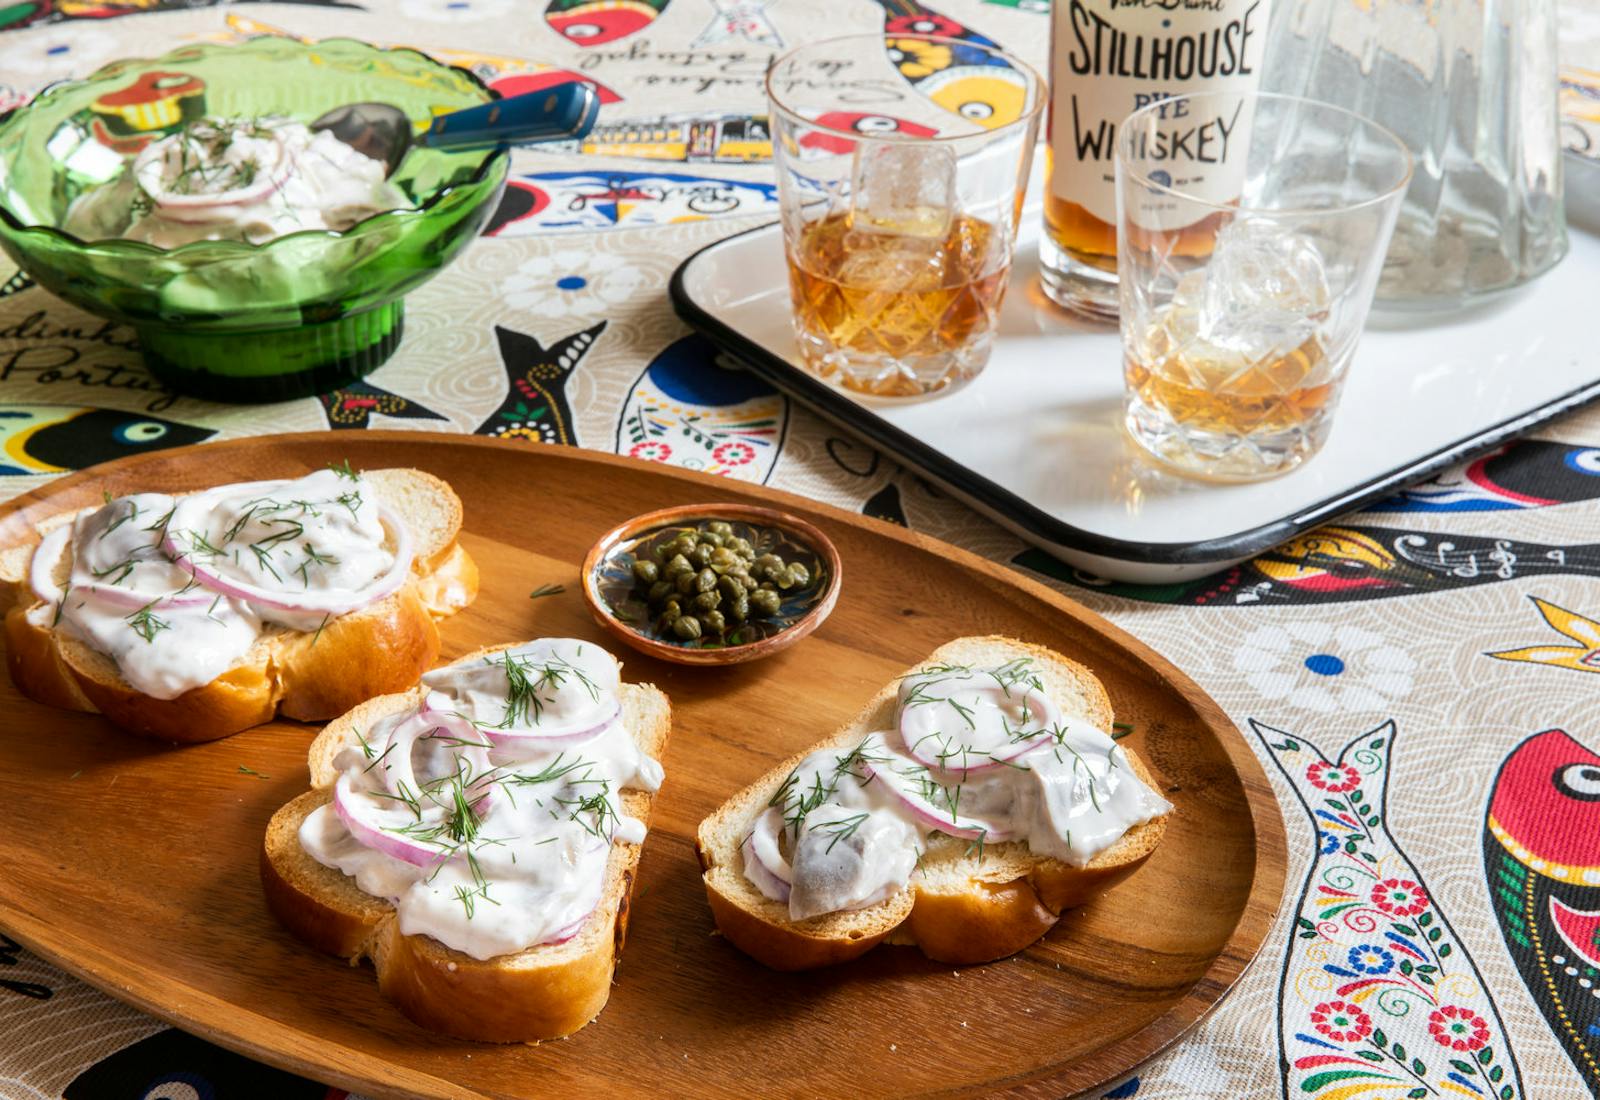 Herring in sour cream spread onto sliced challah garnished with red onion and dill alongside dish of capers and tray of whiskey glasses, atop fish-print tablecloth.